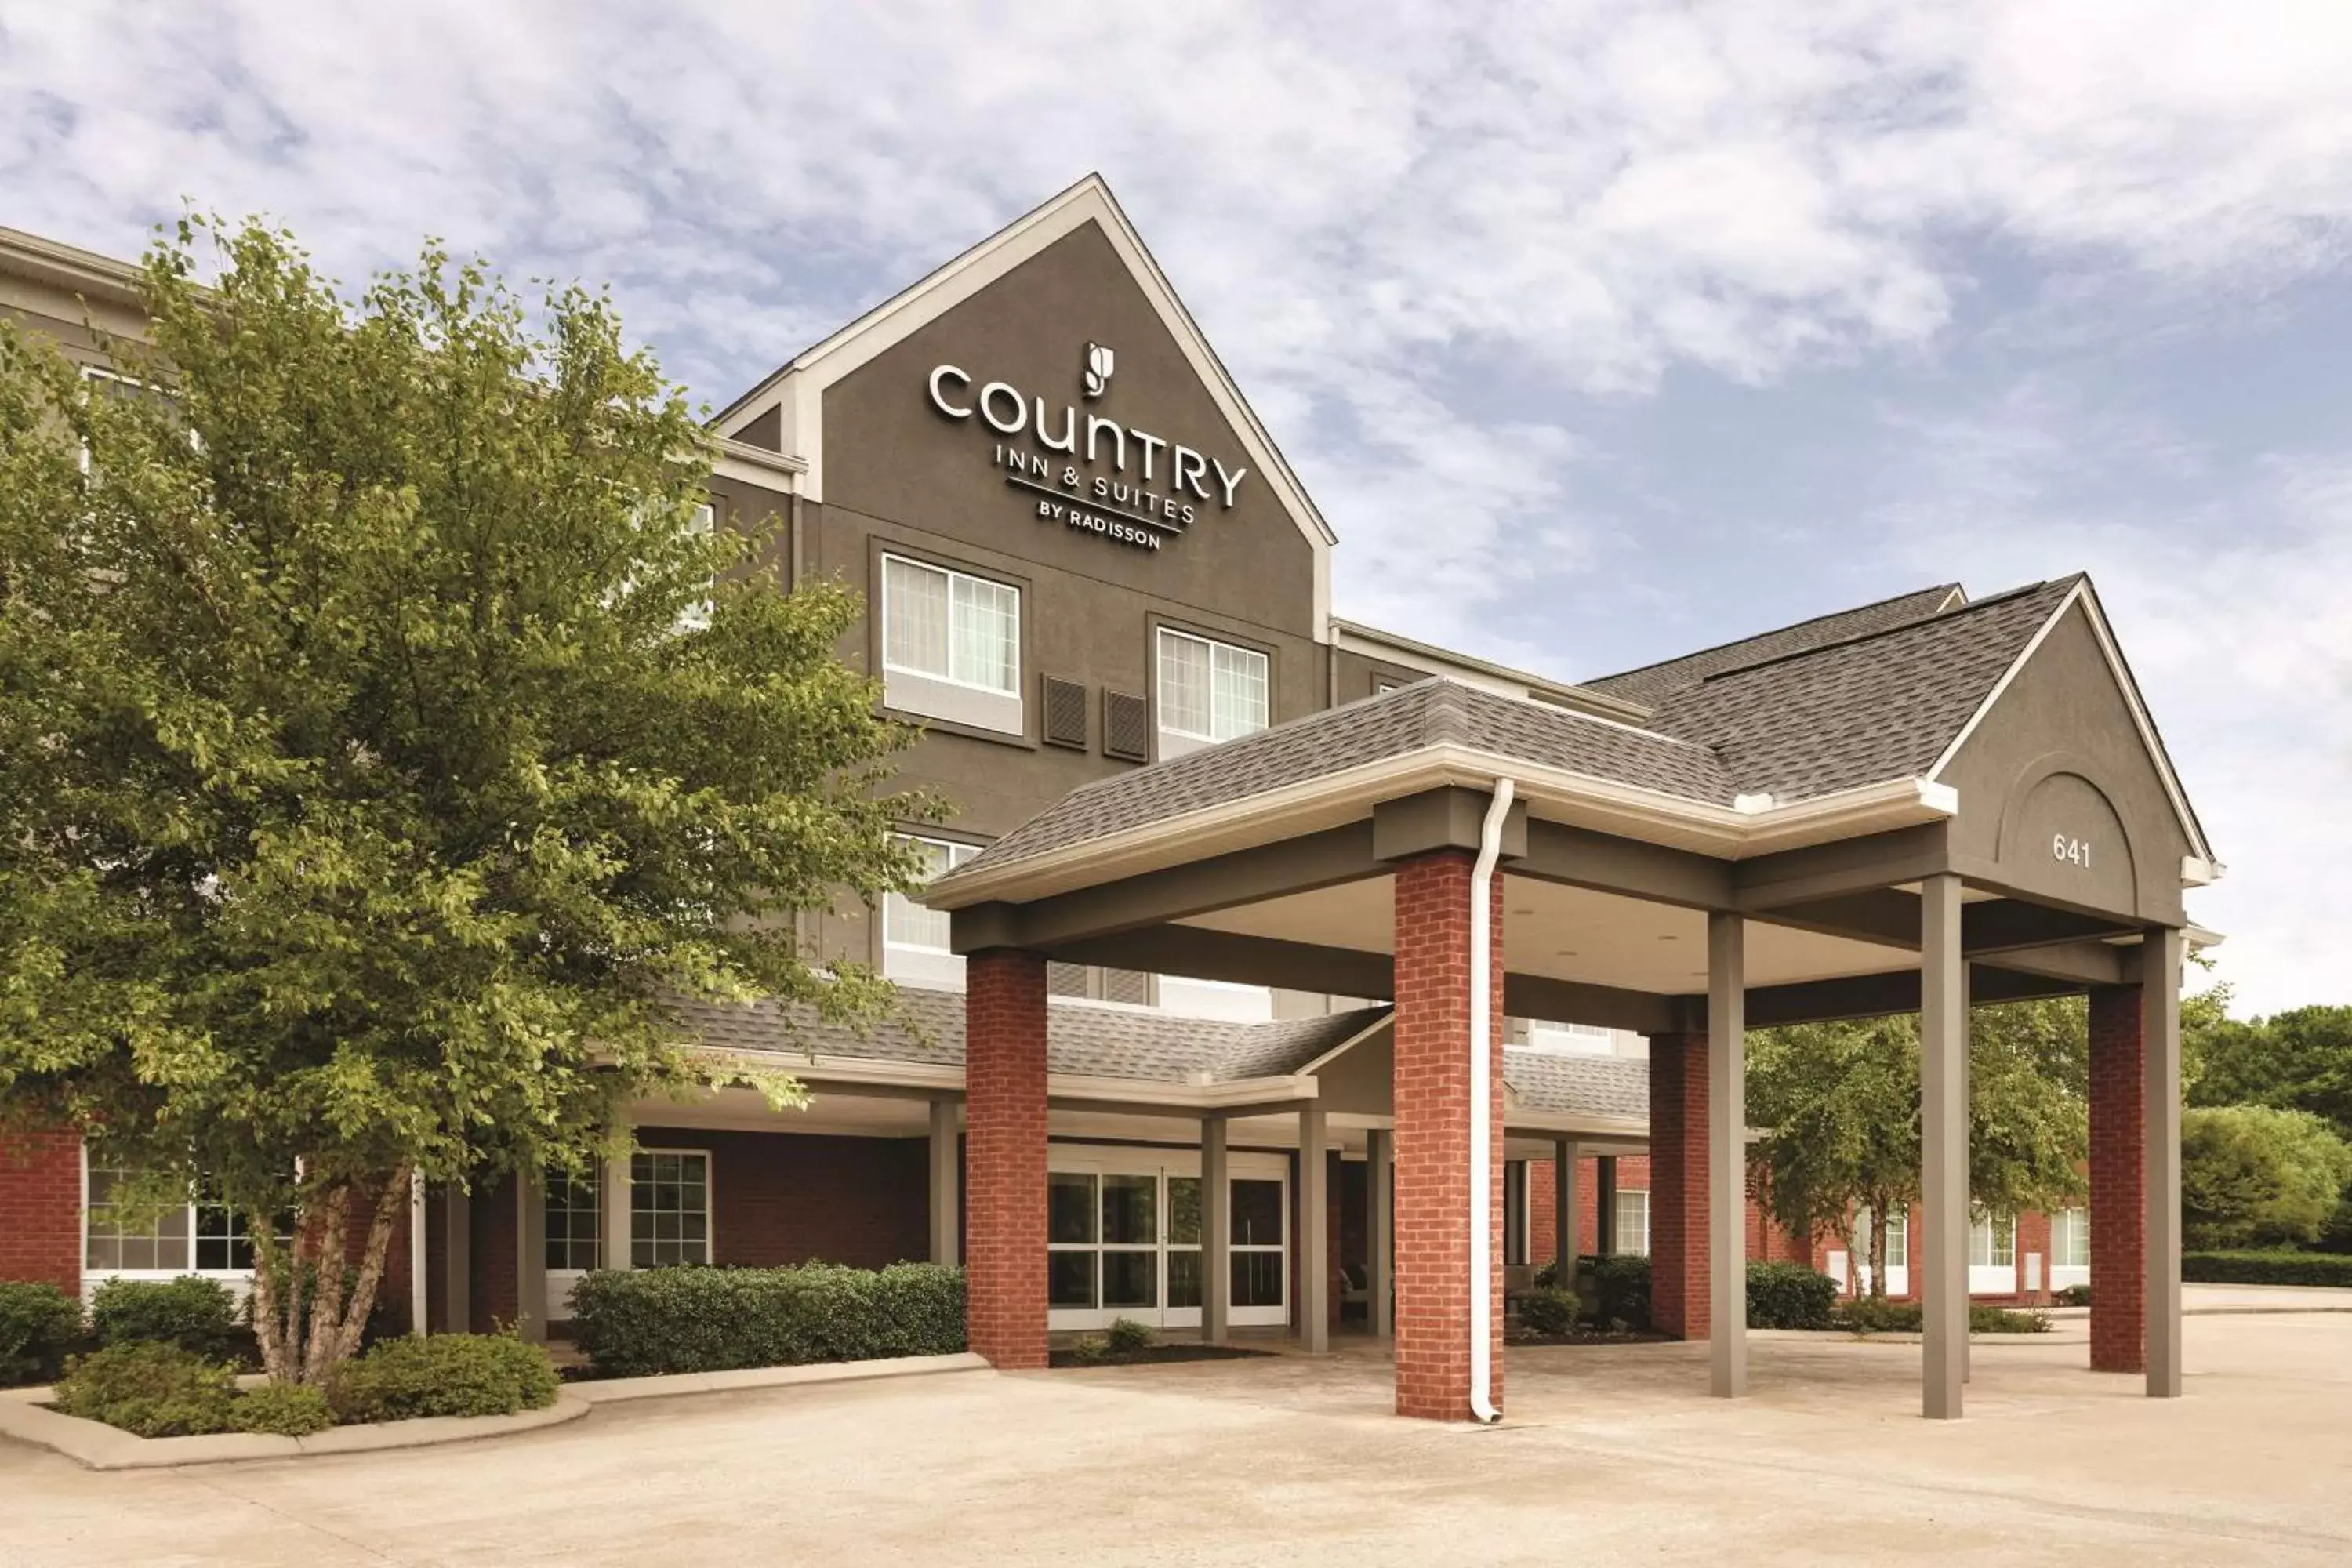 Property Building in Country Inn & Suites by Radisson, Goodlettsville, TN